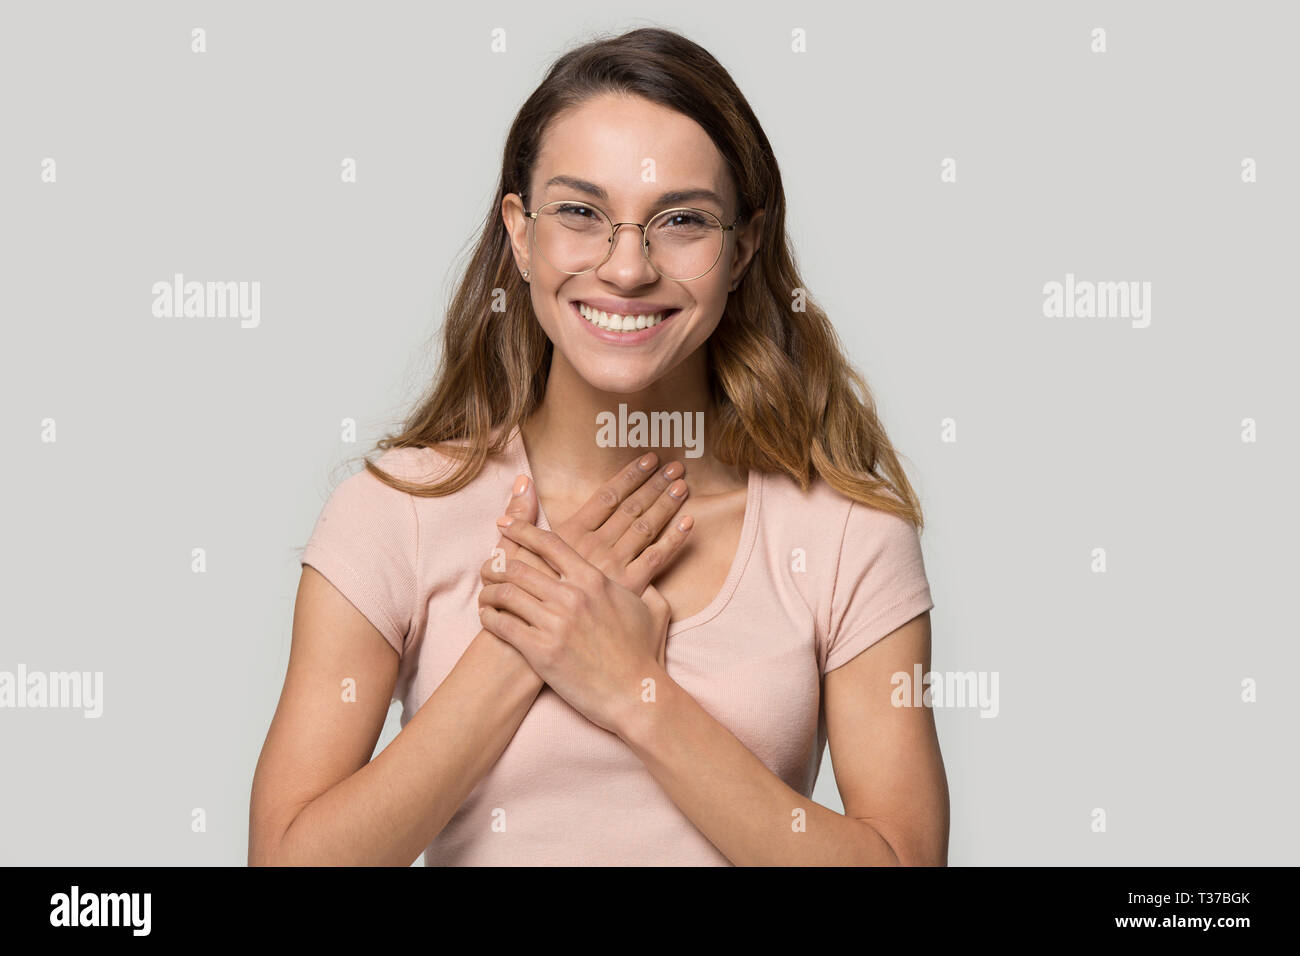 Headshot woman in glasses feels grateful holding hands on chest Stock Photo